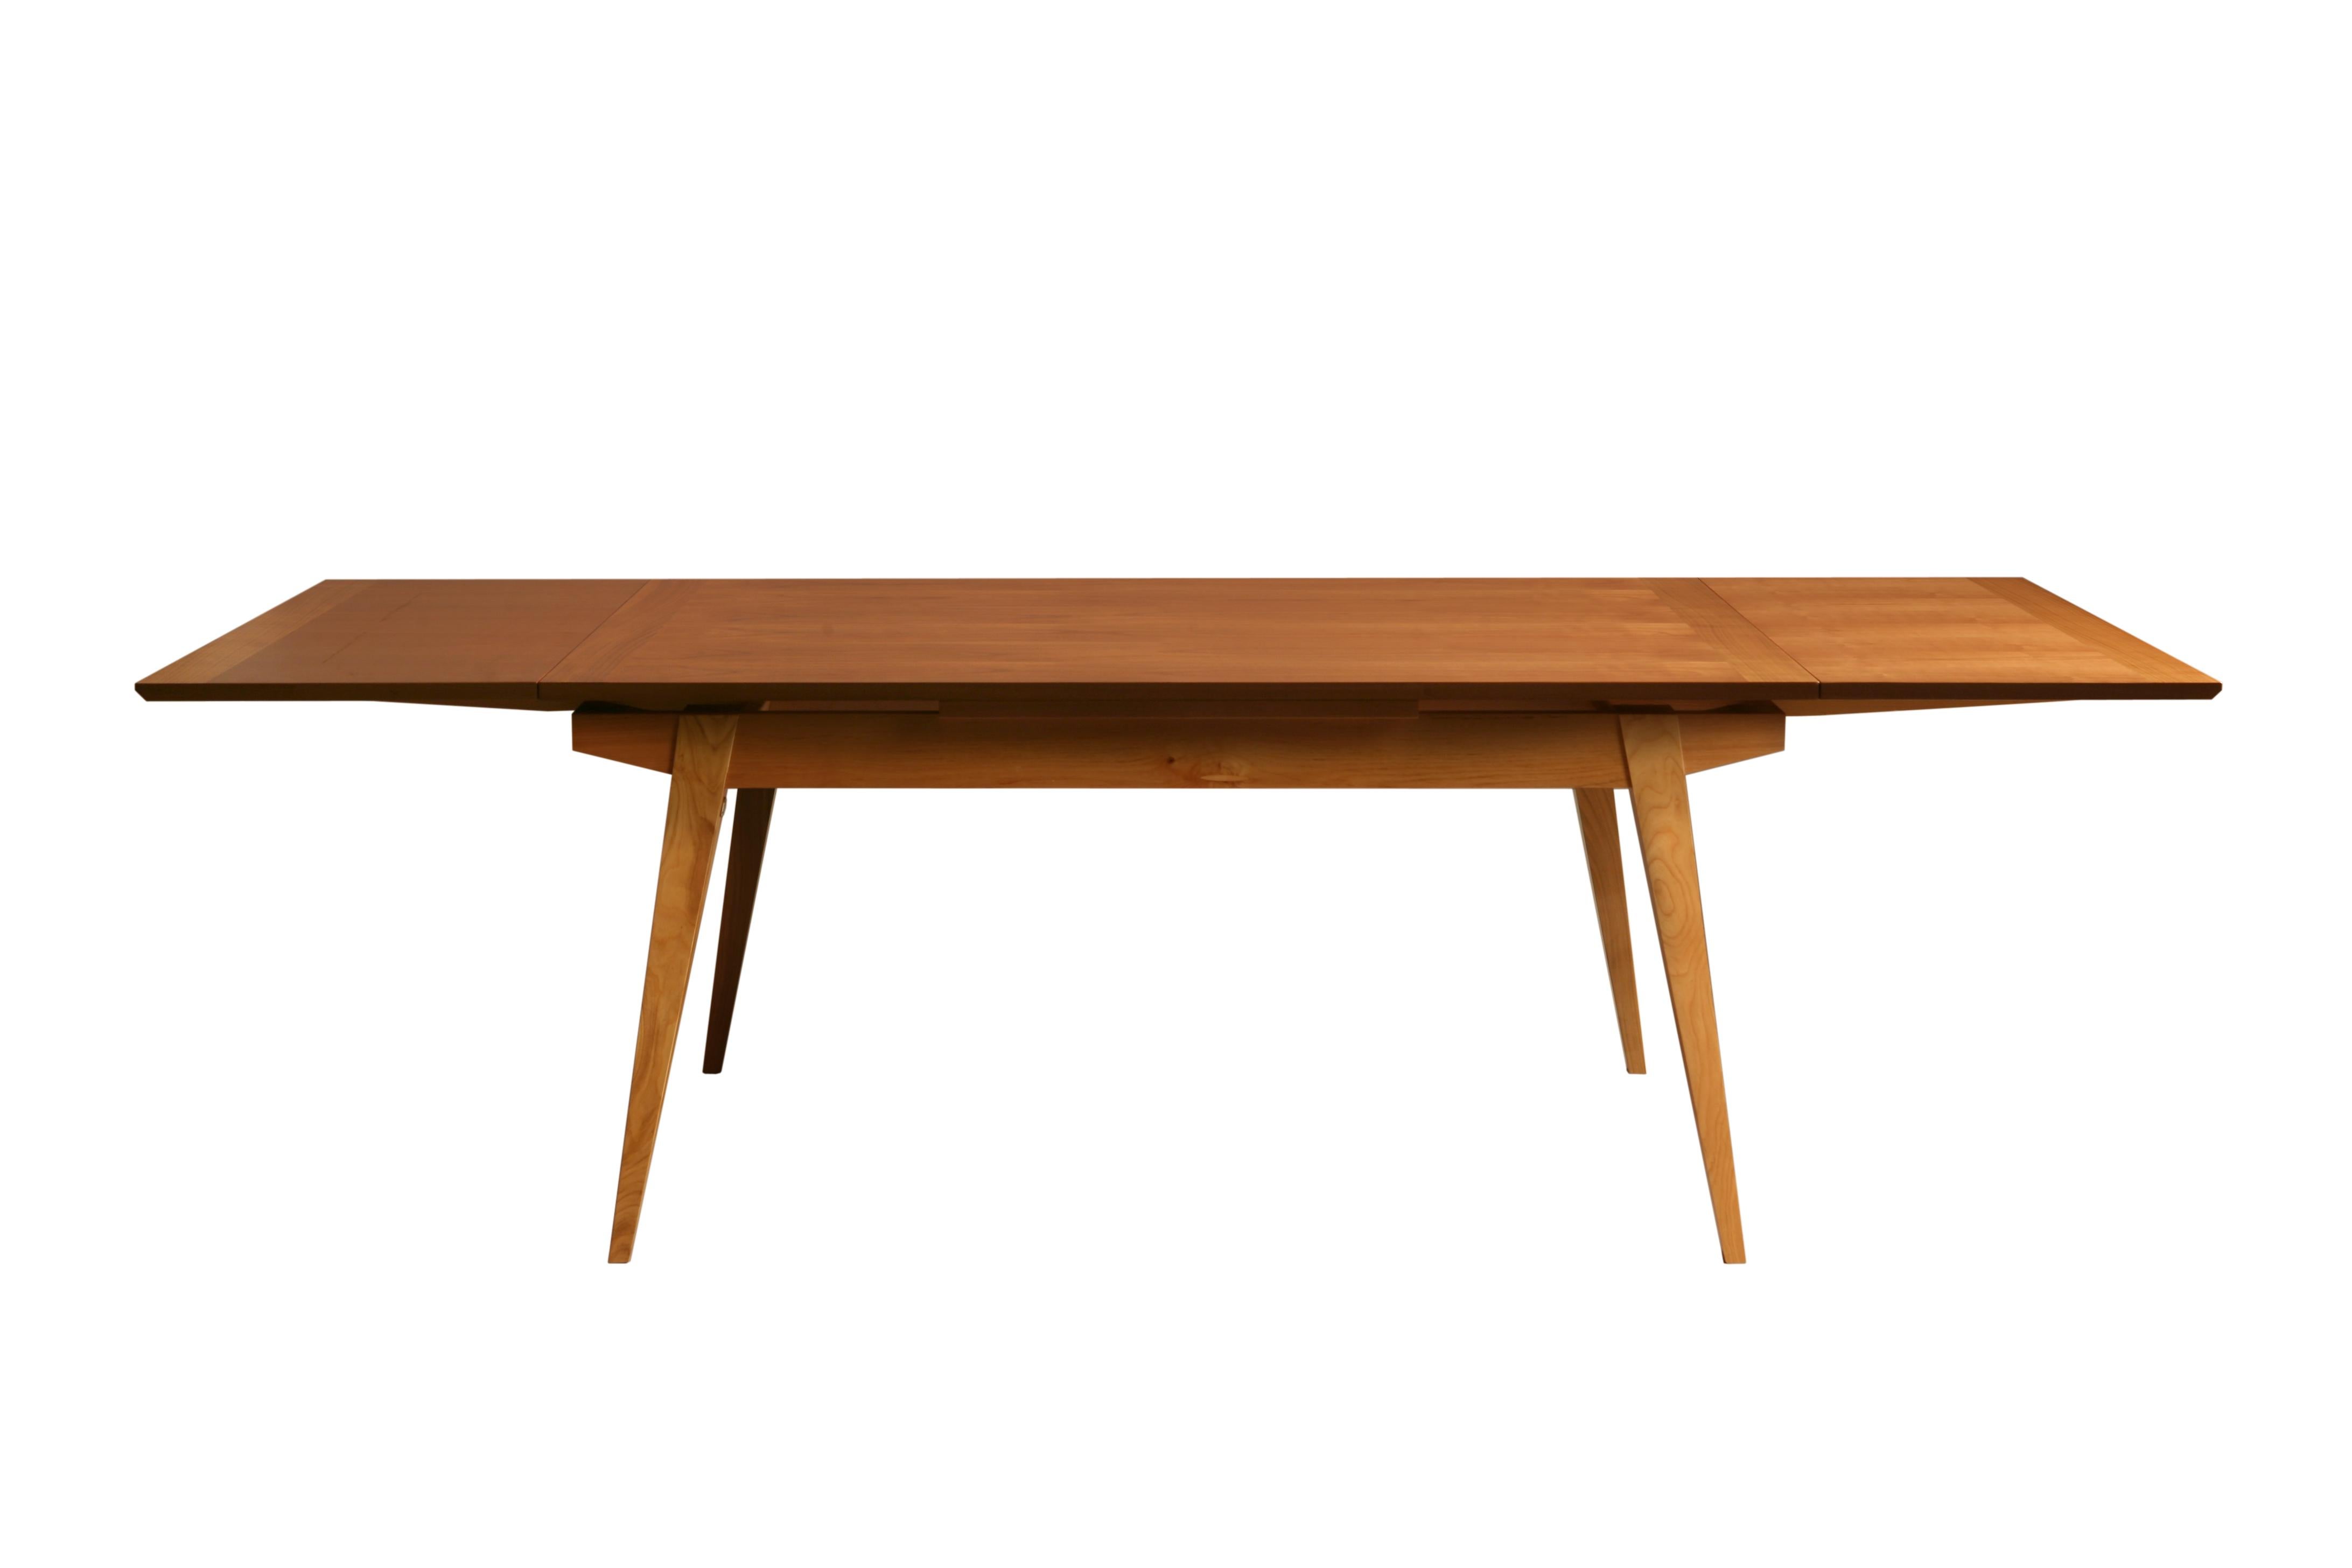 Extendable table made of cherry wood, with two side extensions under the top
Manufactured by Morelato.